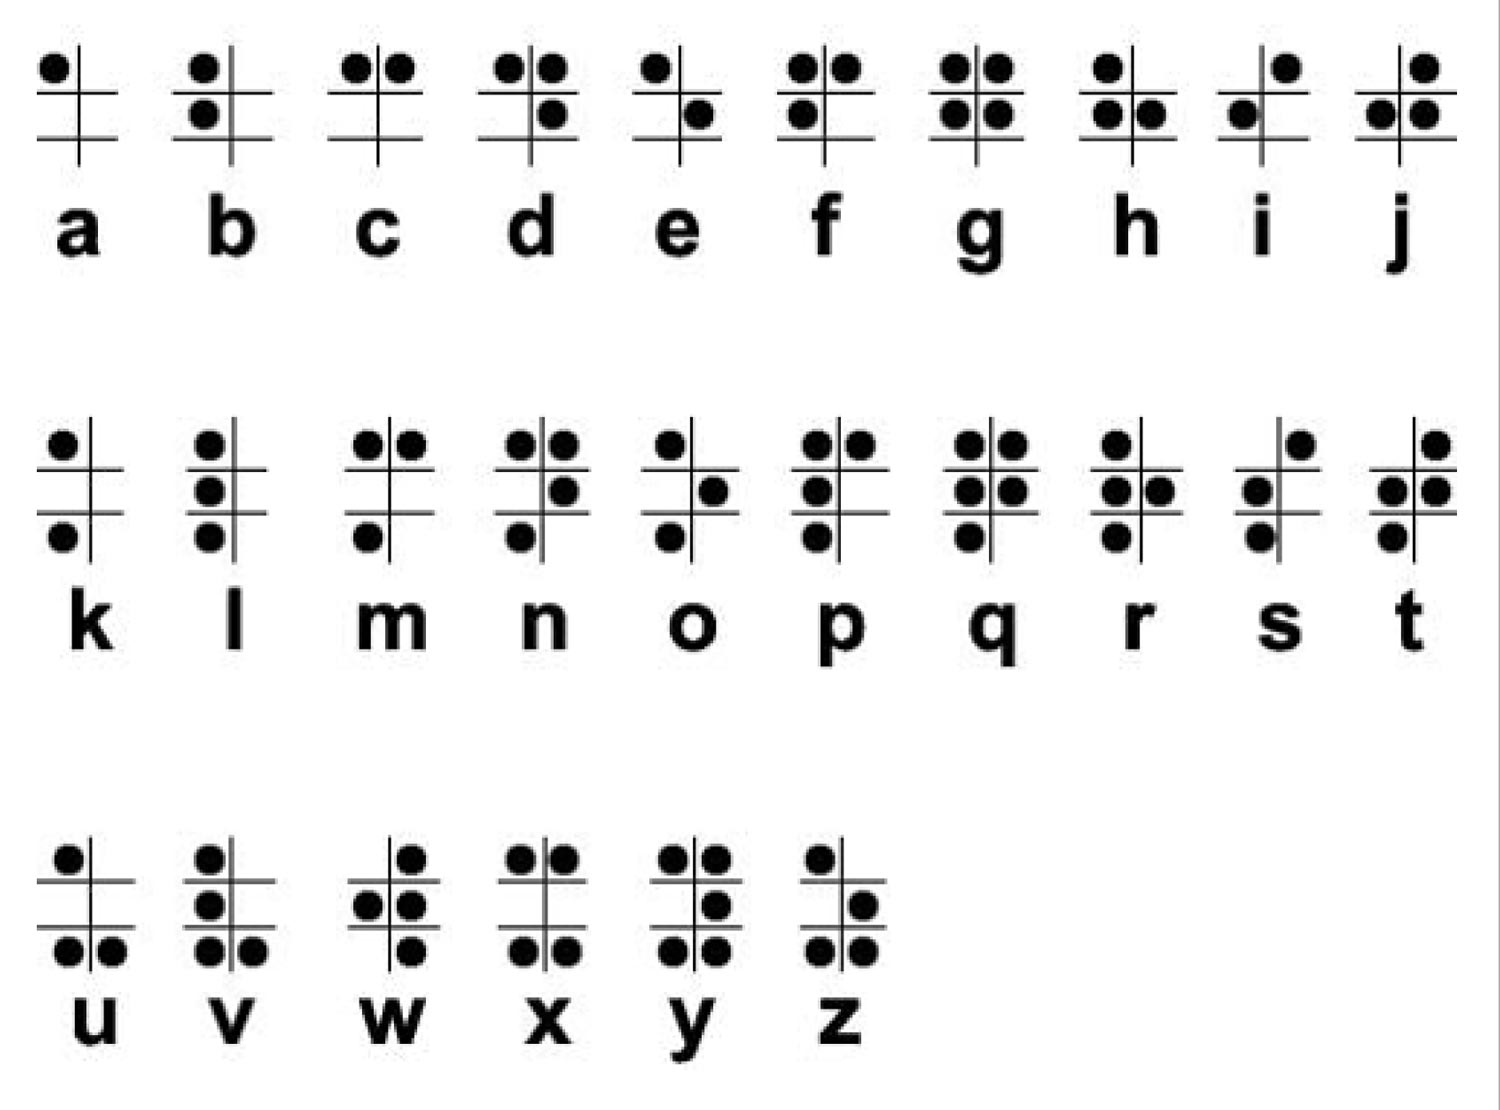 How To Make Braille Alphabet Cards